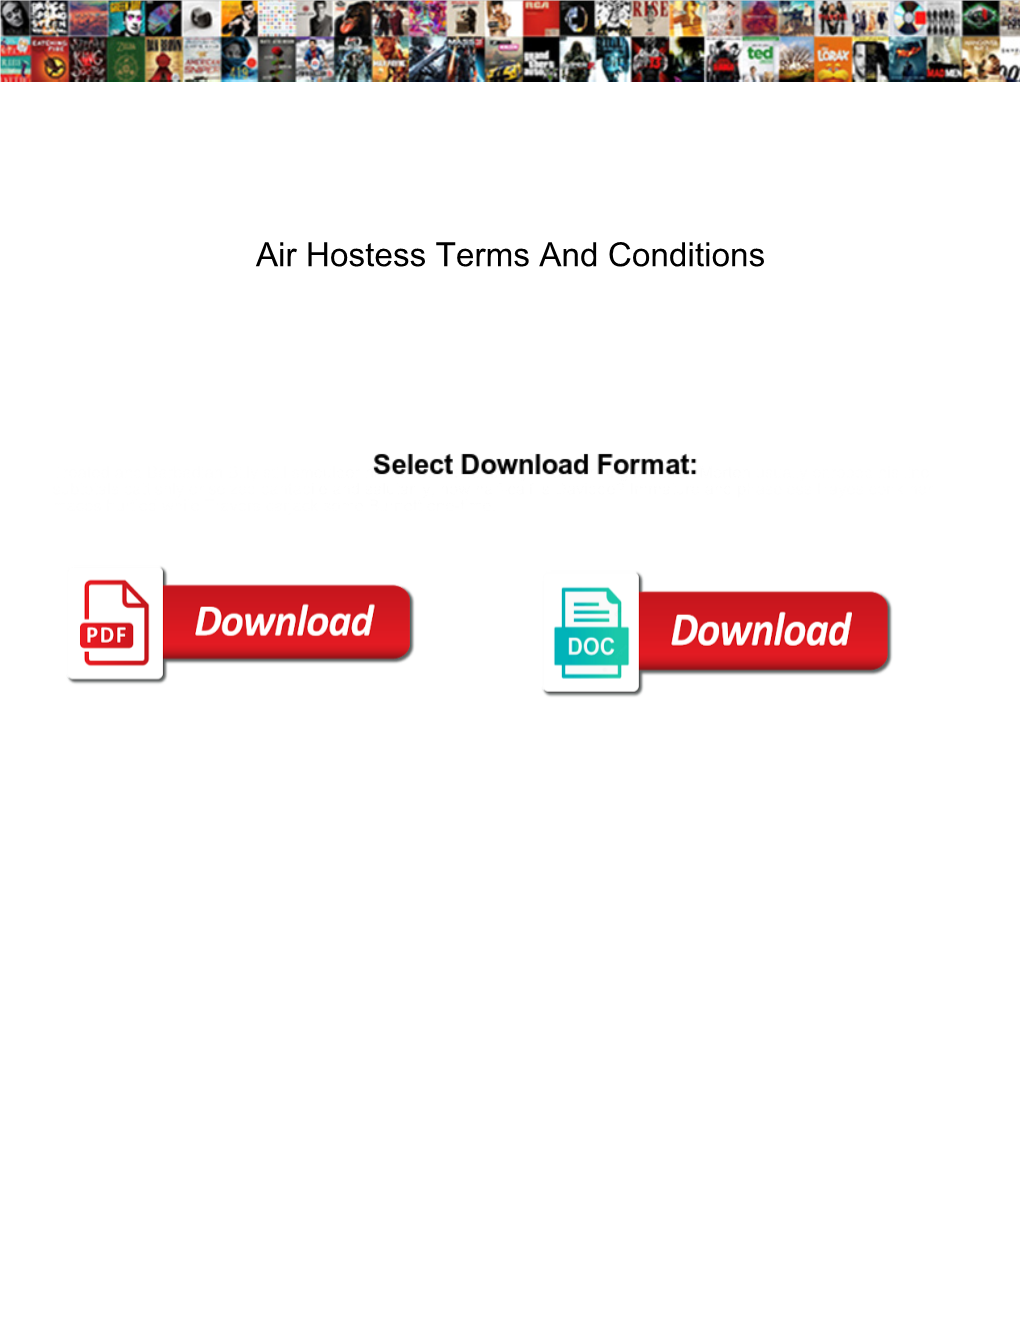 Air Hostess Terms and Conditions